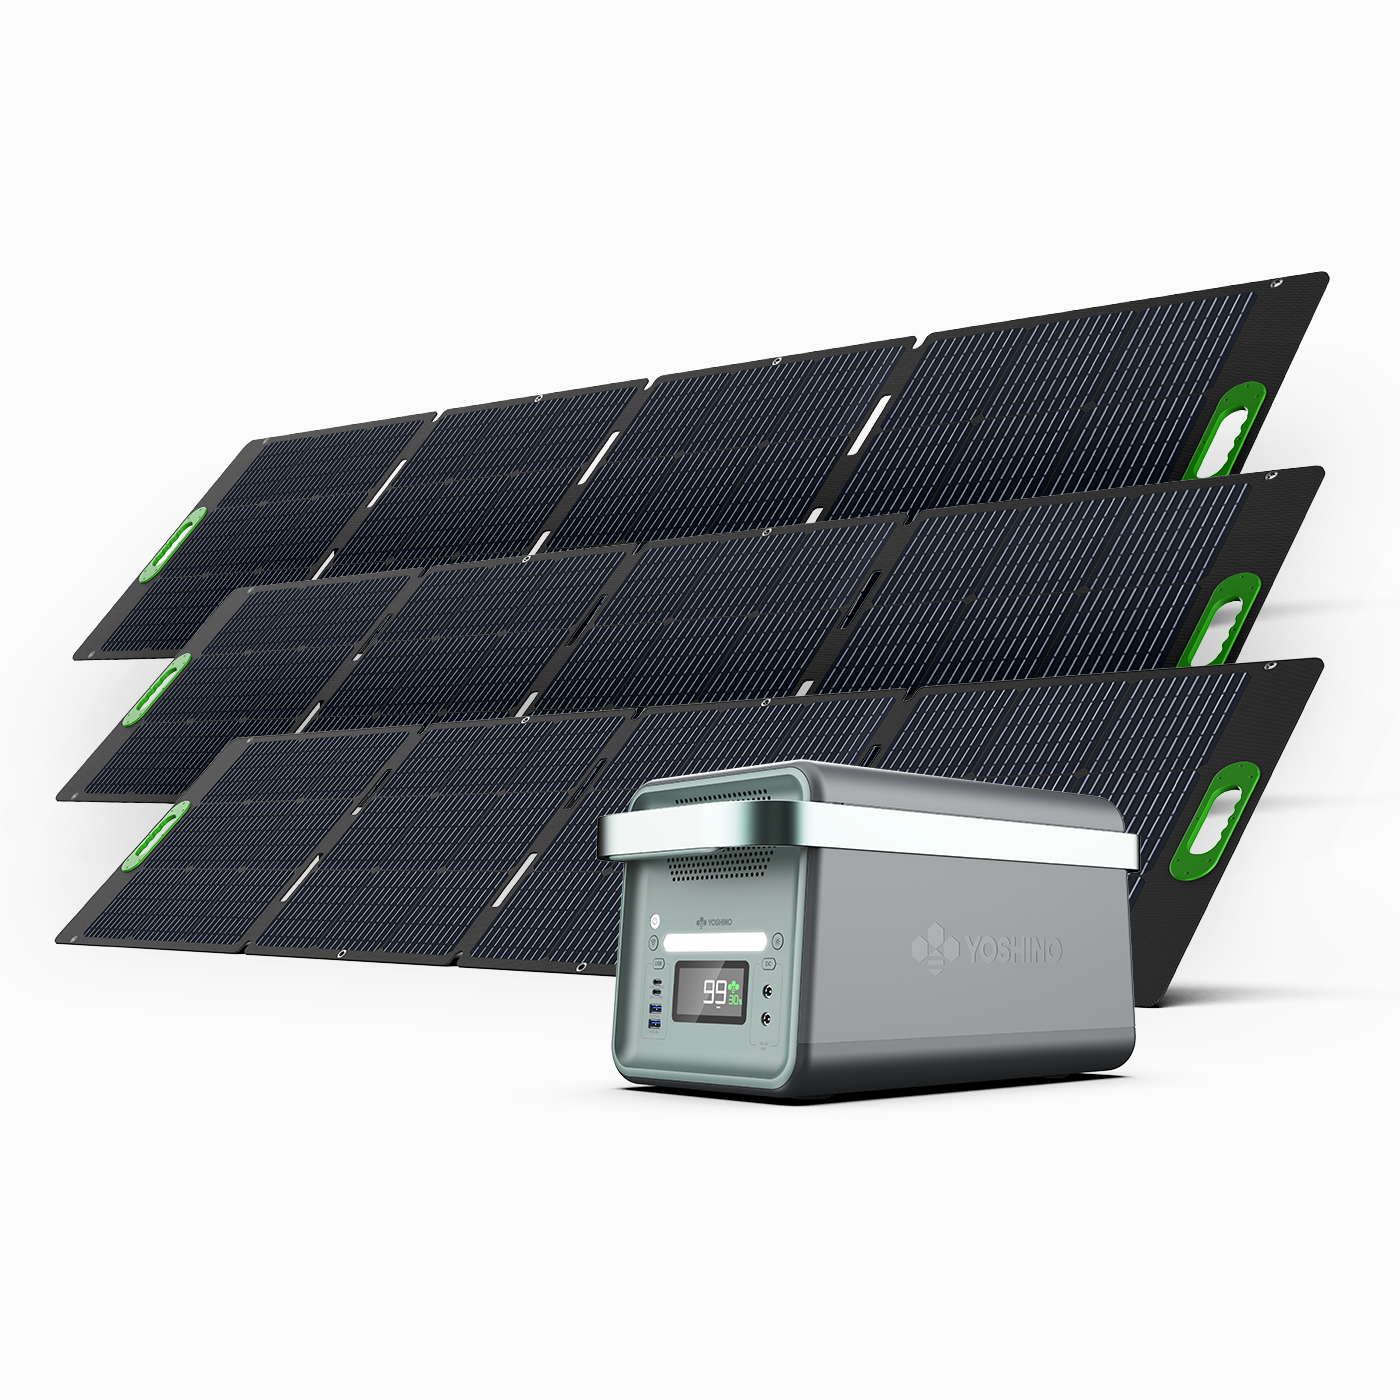 Yoshino Power K20SP23 Solid State Portable Solar Generator - Angled View